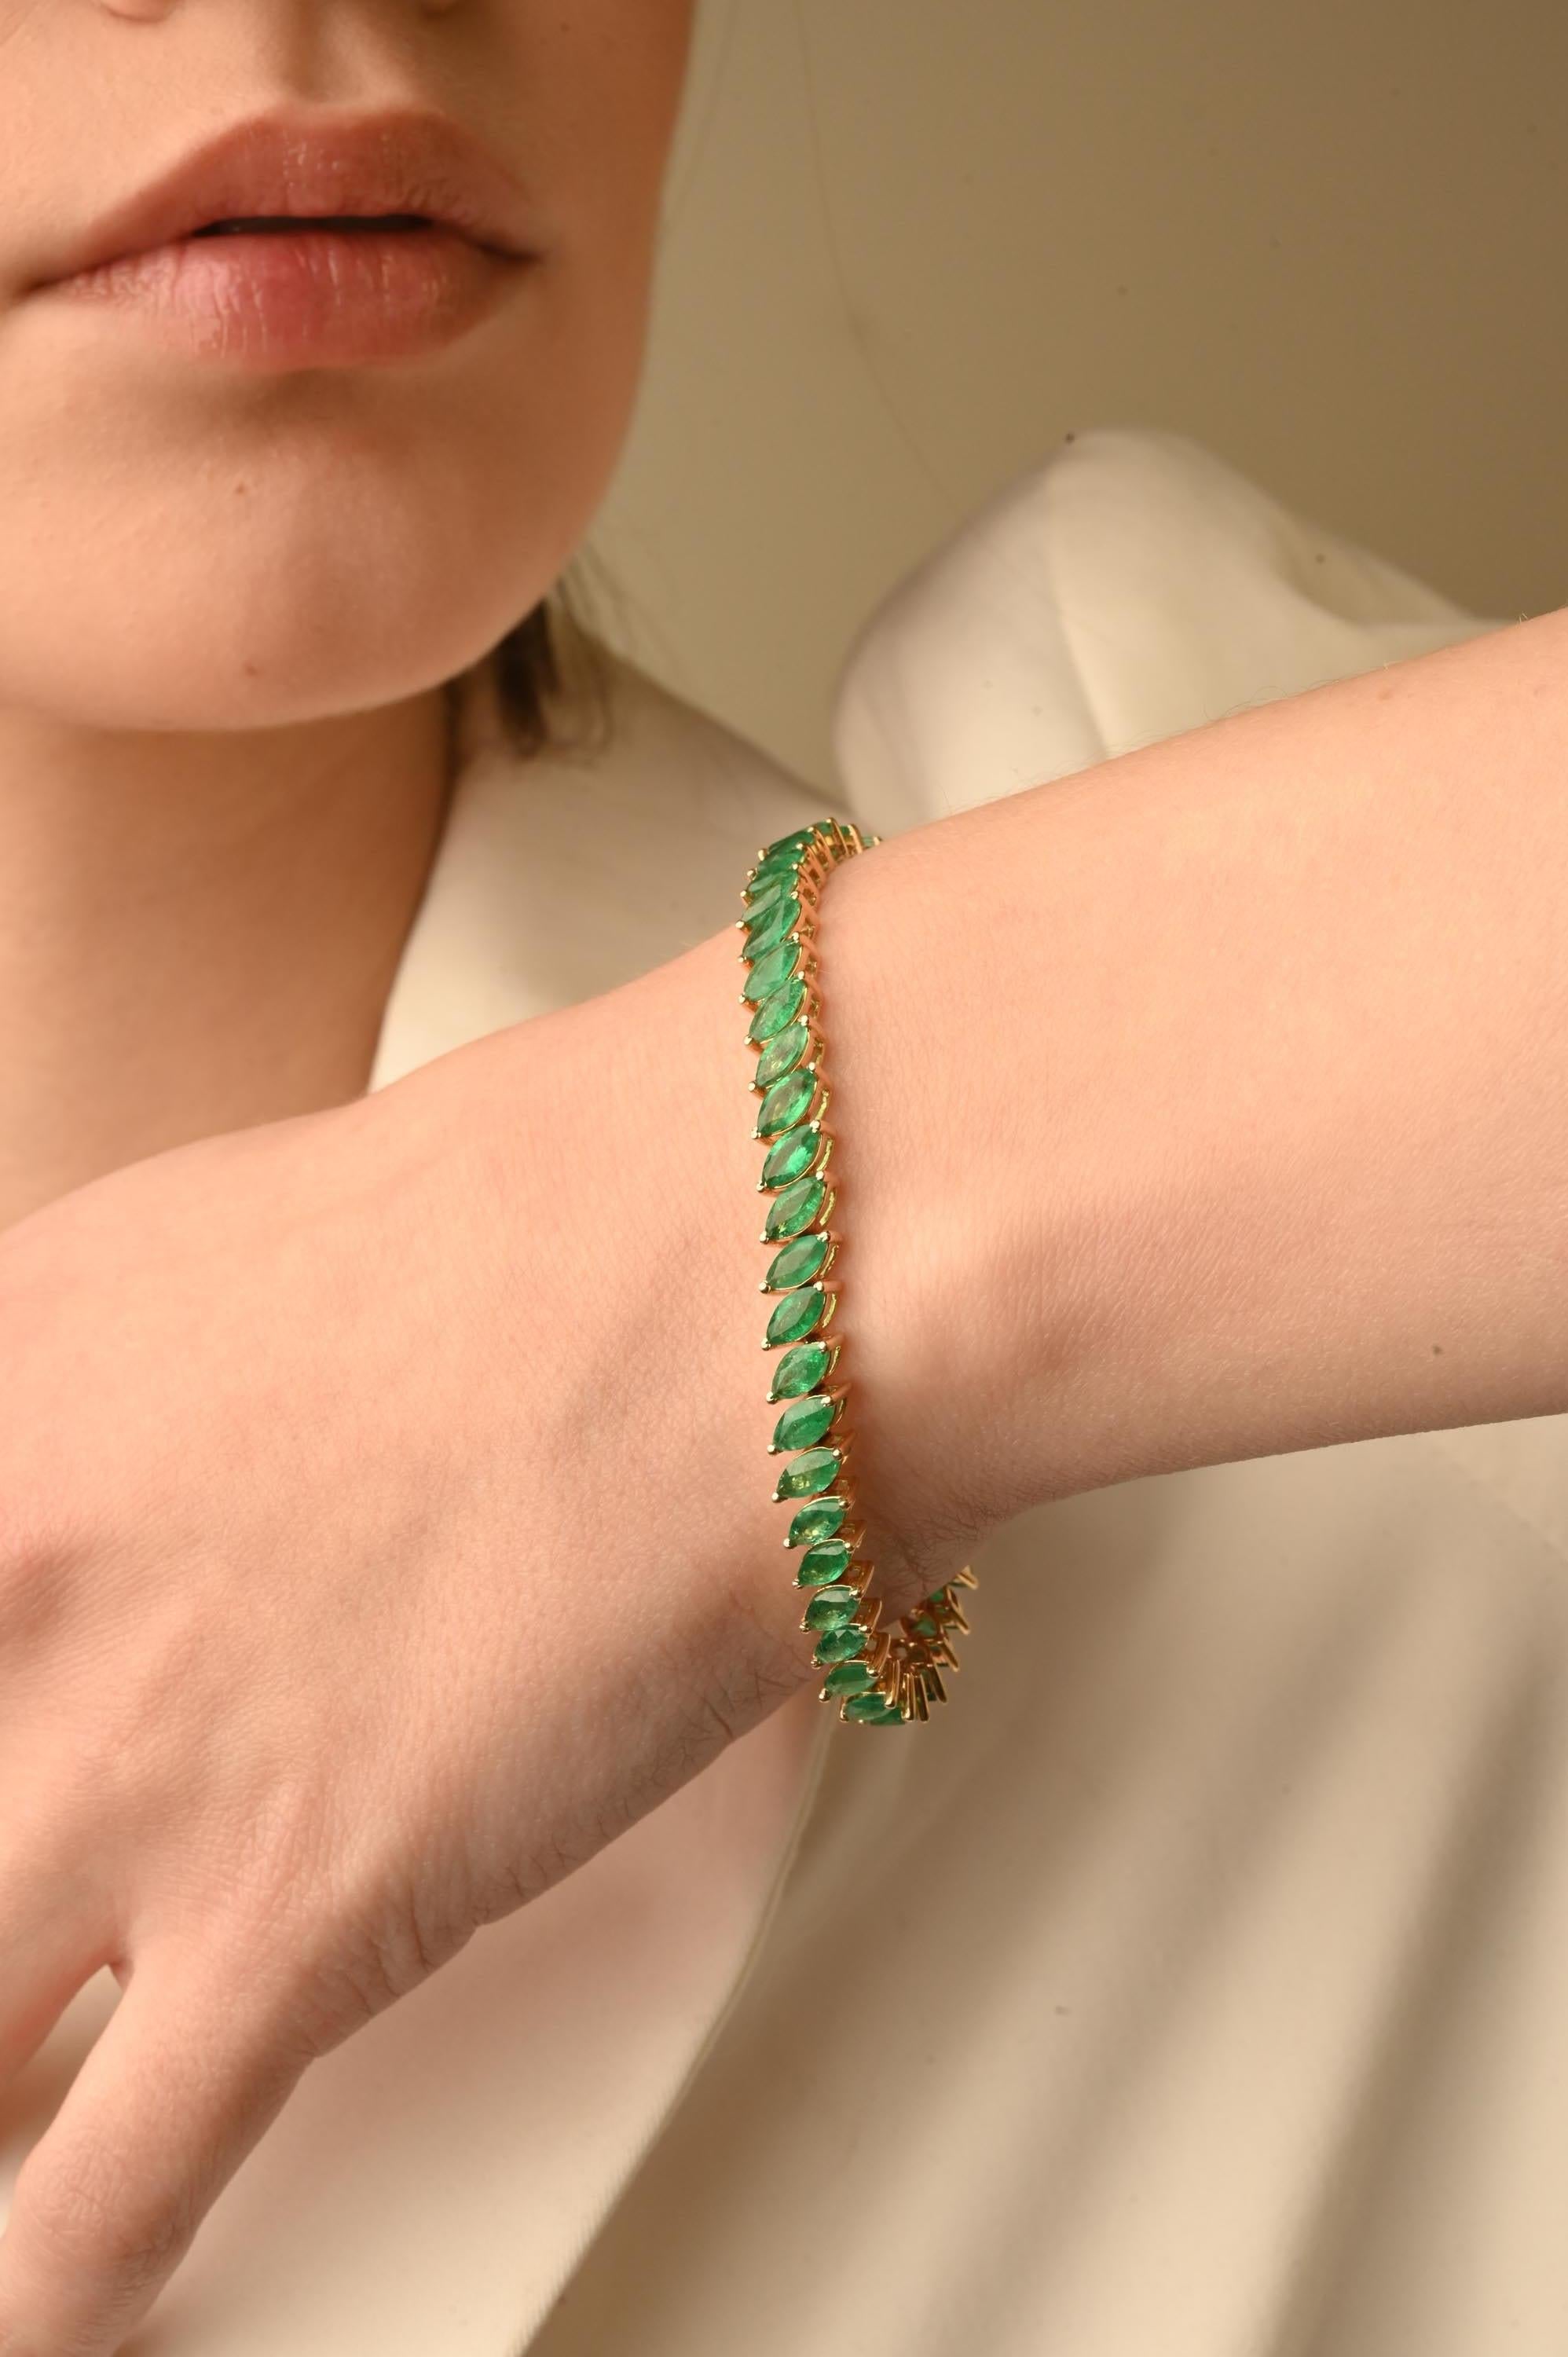 Emerald bracelet in 14K Gold. It has a perfect marquise cut gemstone to make you stand out on any occasion or an event.
A tennis bracelet is an essential piece of jewelry when it comes to your wedding day. The sleek and elegant style complements the